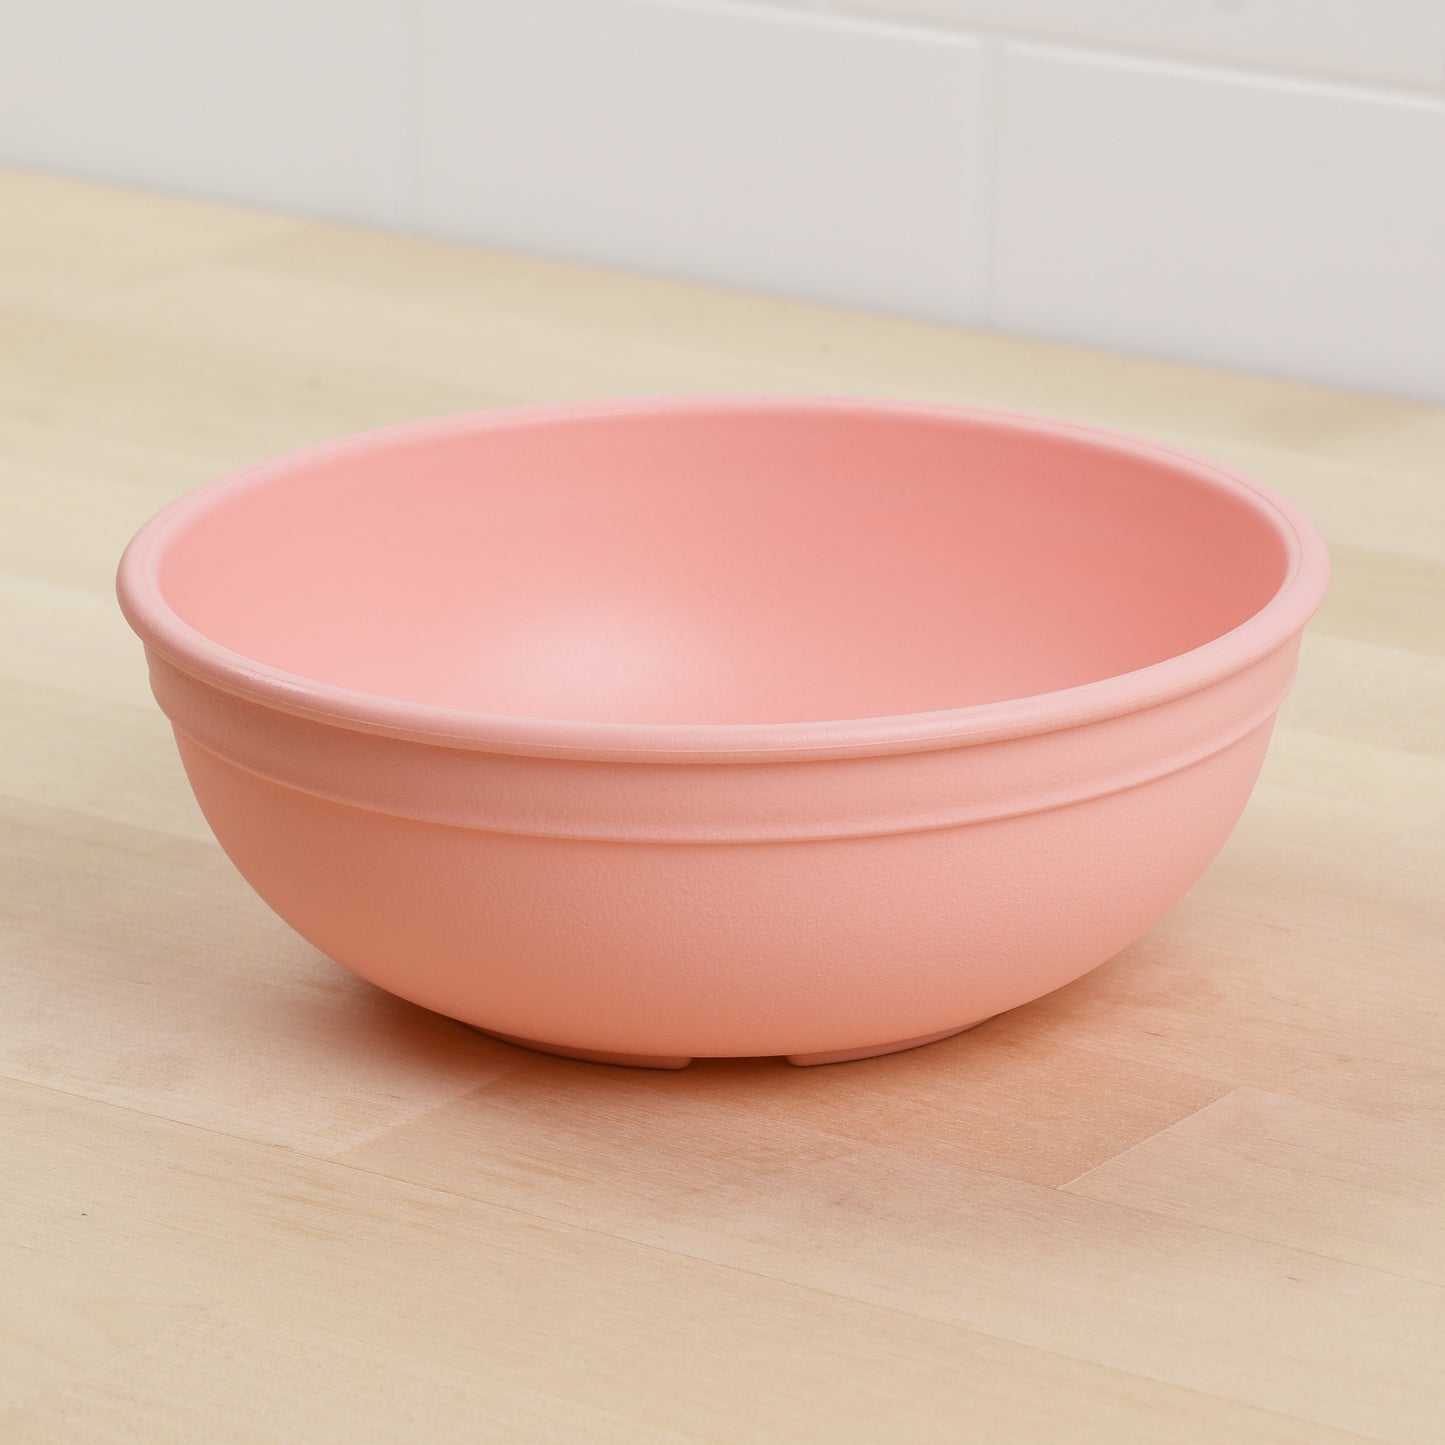 Large Bowls - Prepp'd Kids - Re-Play Recycled